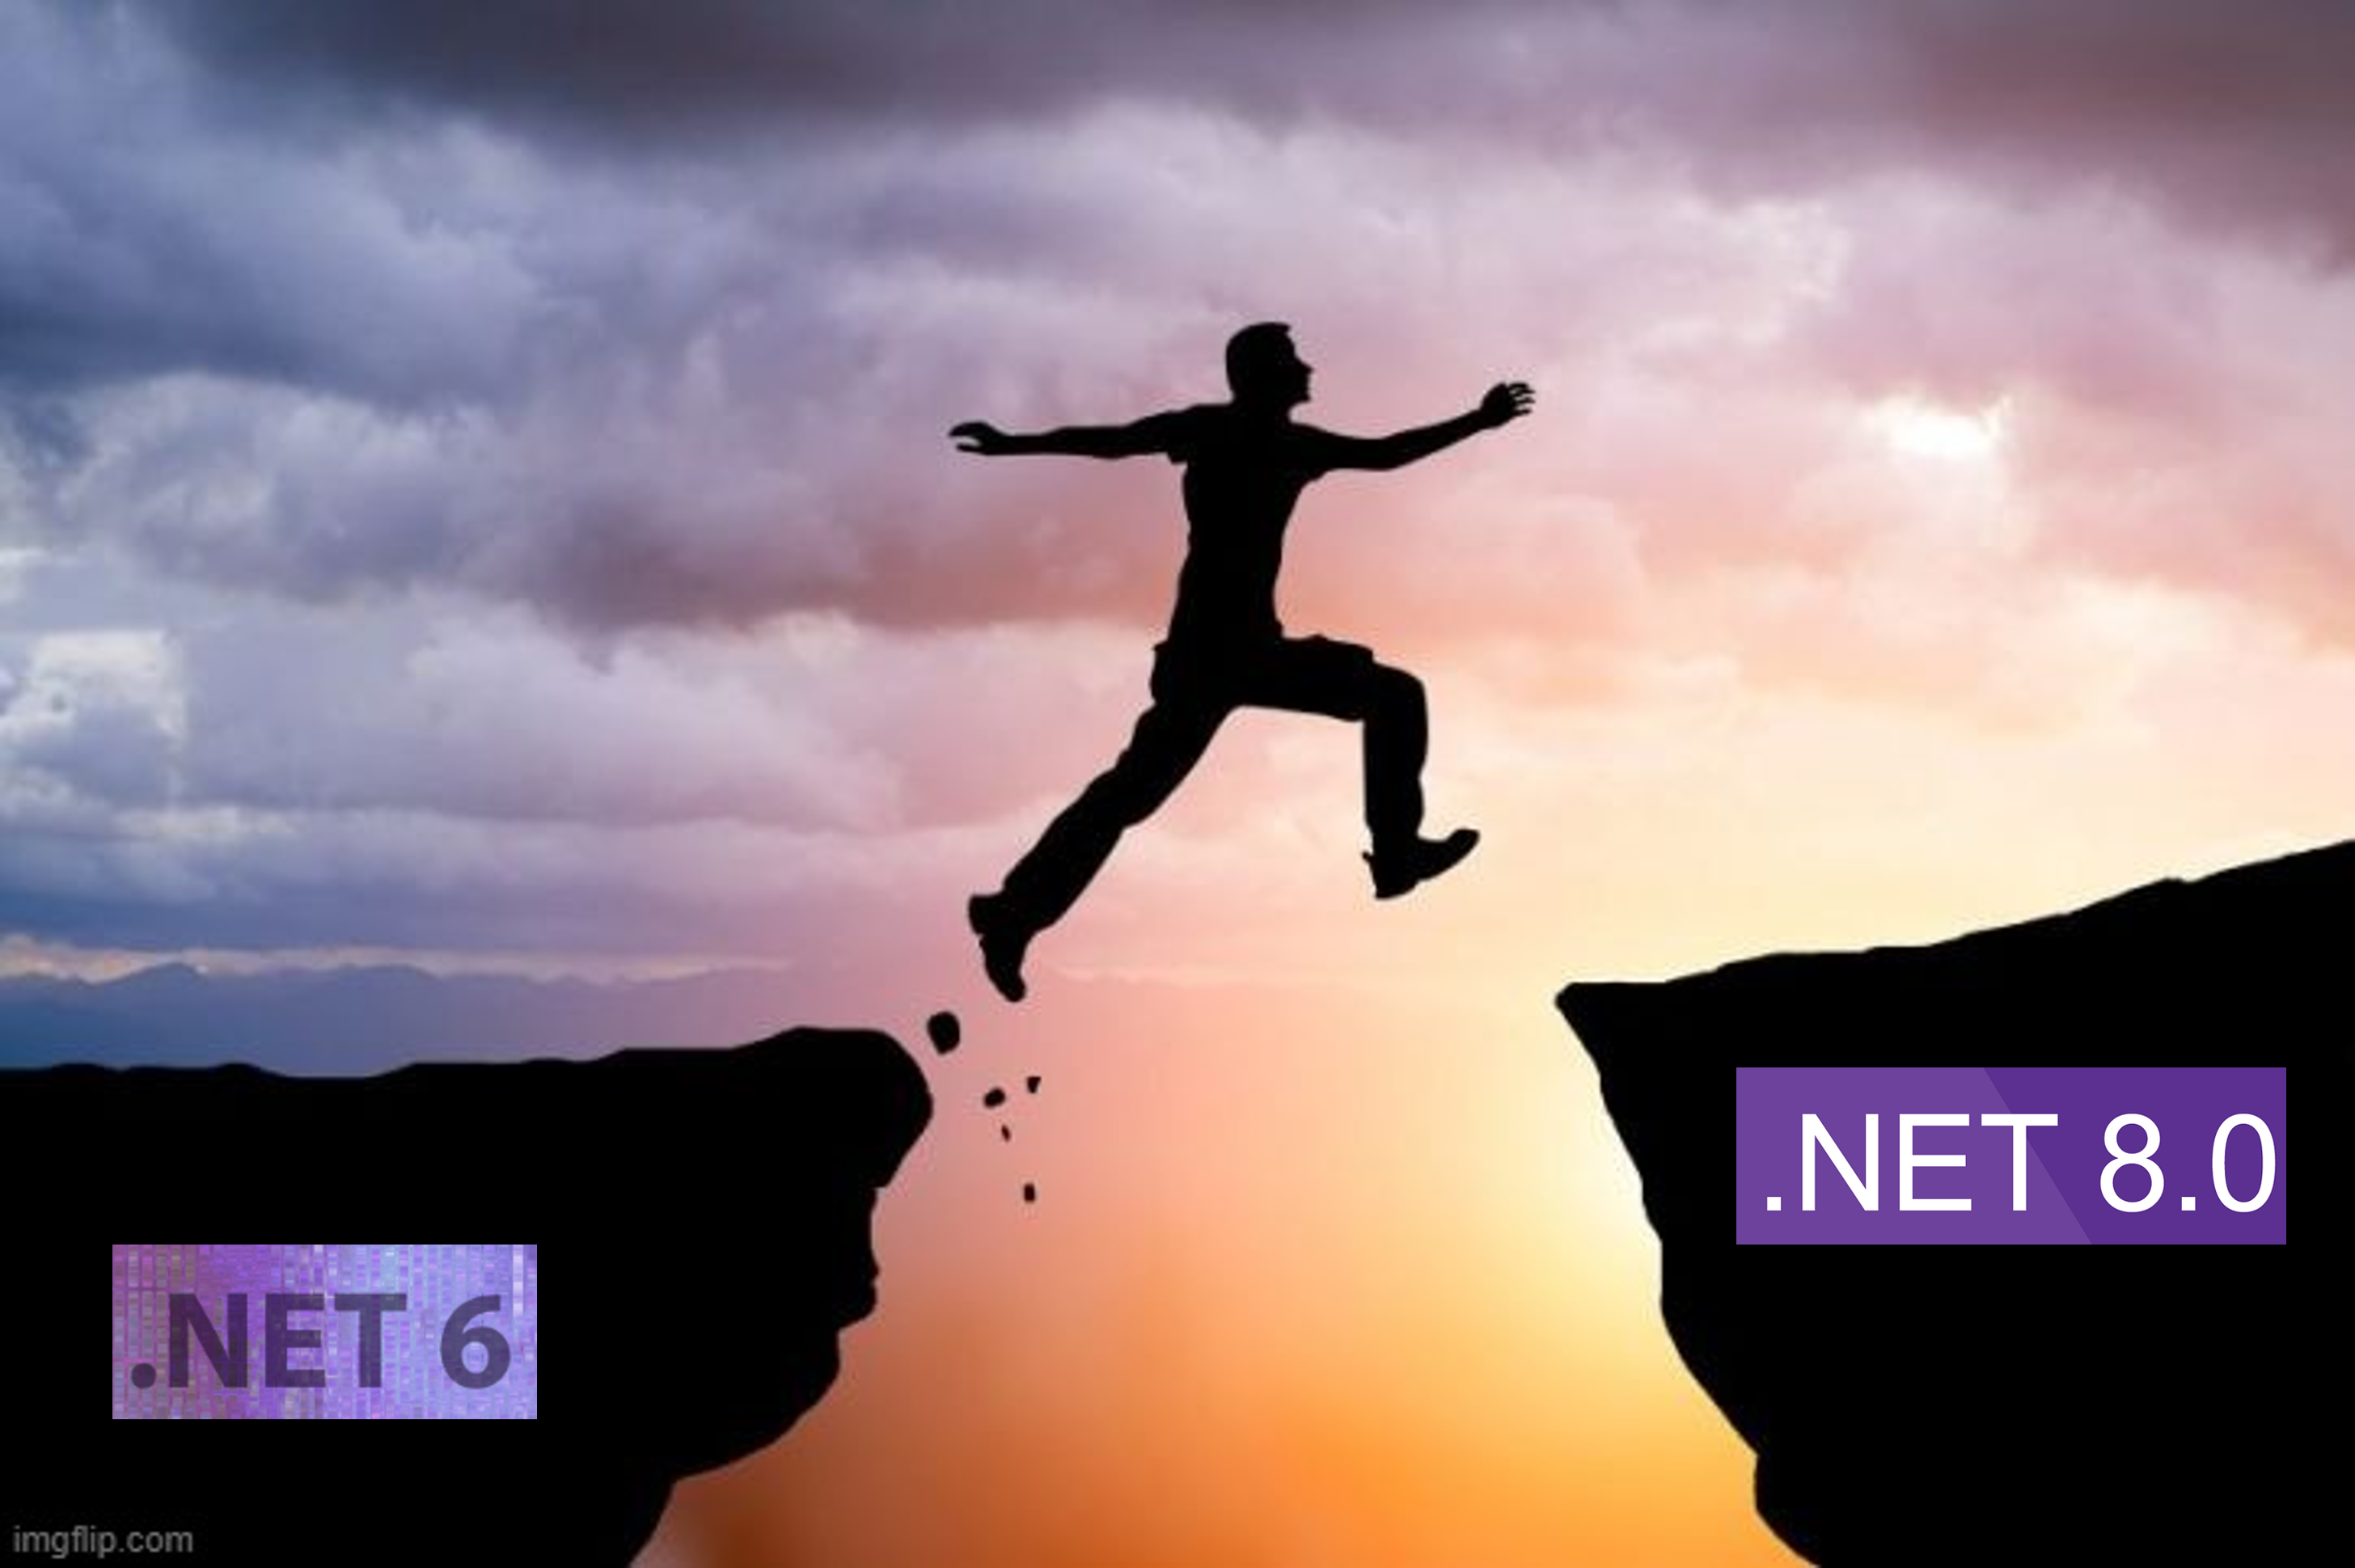 To Upgrade .NET 6 to .NET 8 or Not: Is it Worth the Leap?